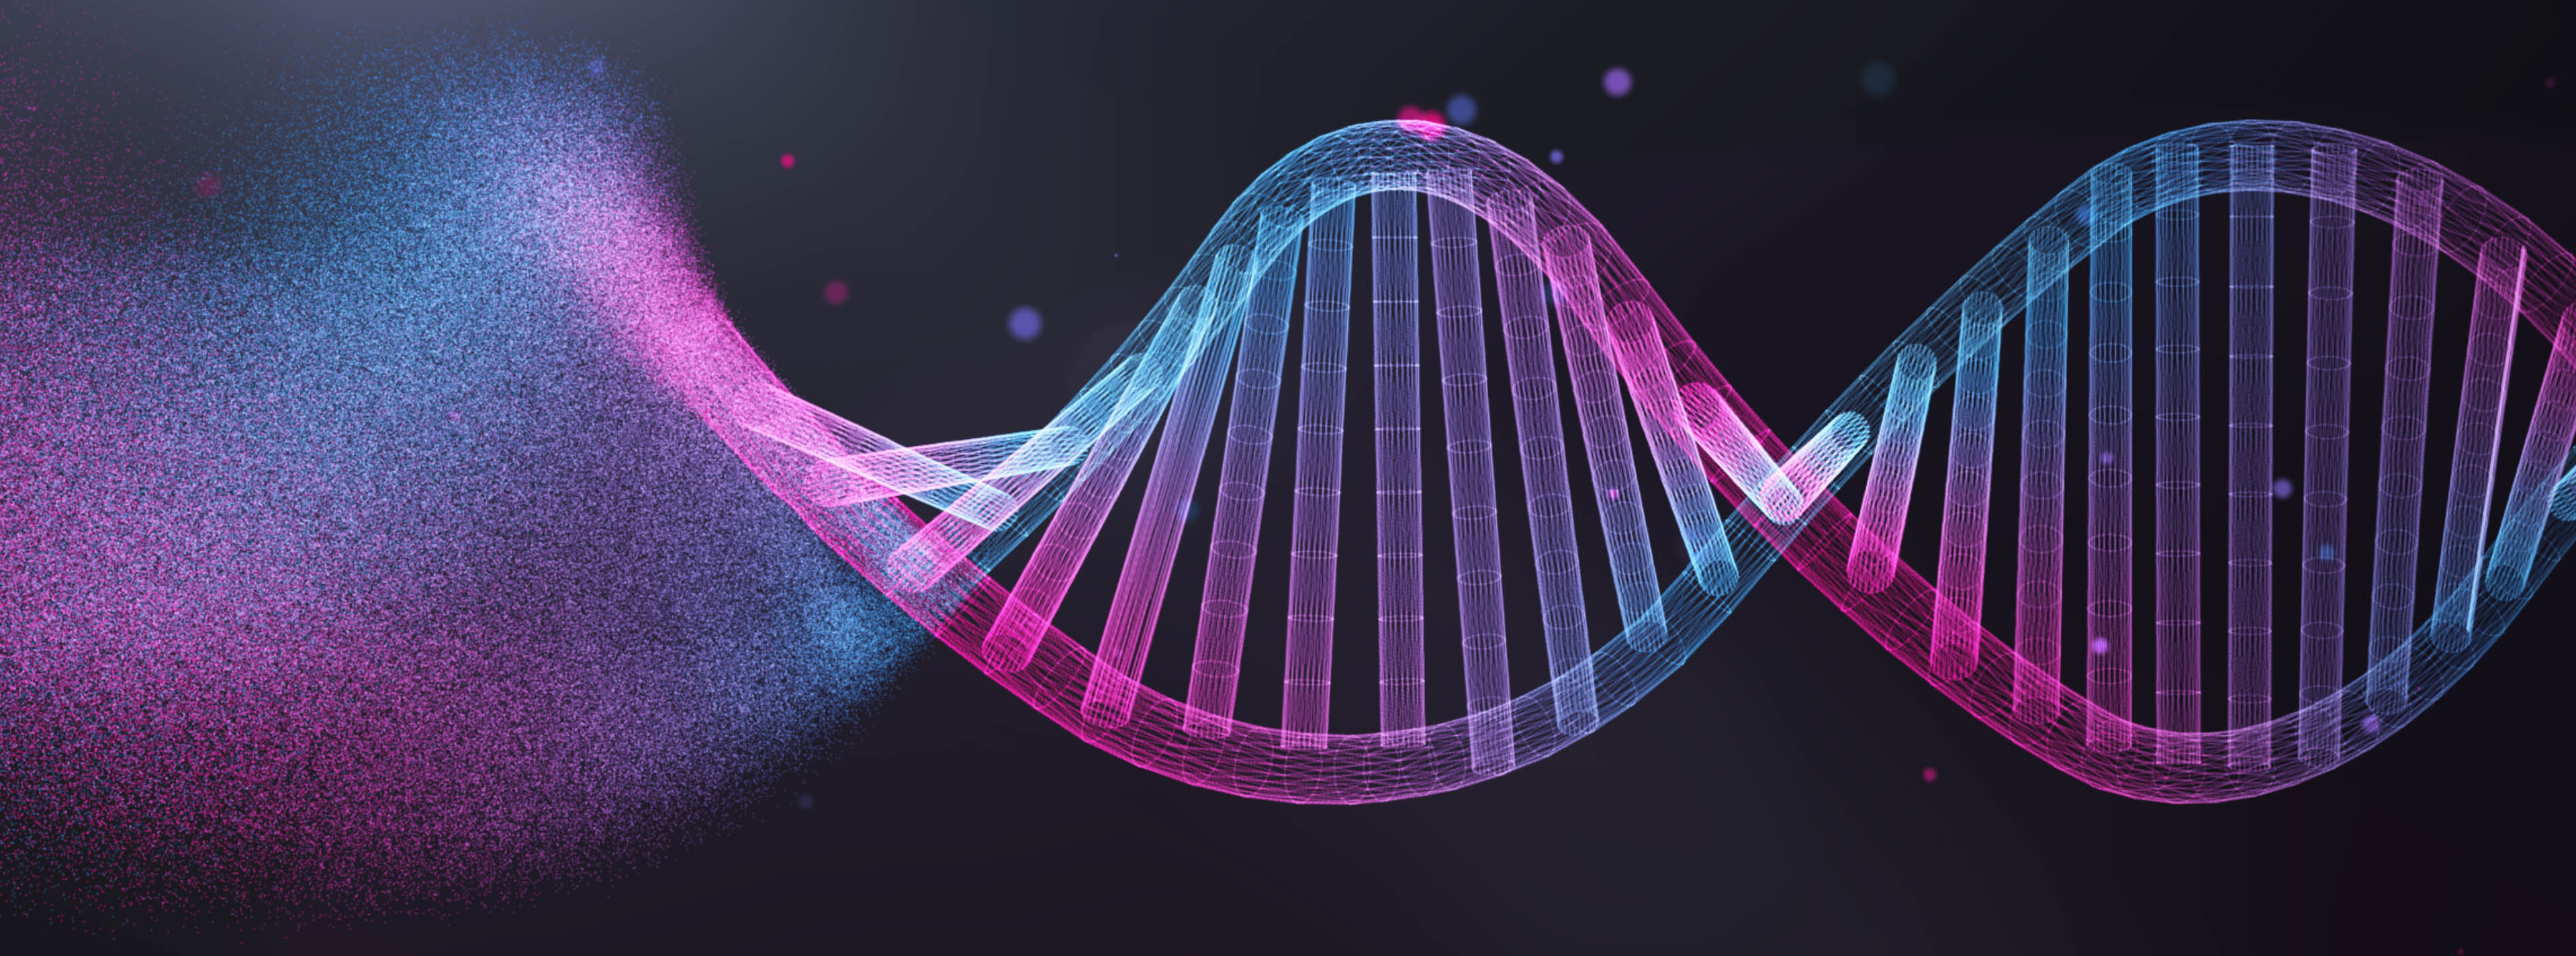 RARe-SOURCE Banner Image - DNA double helix